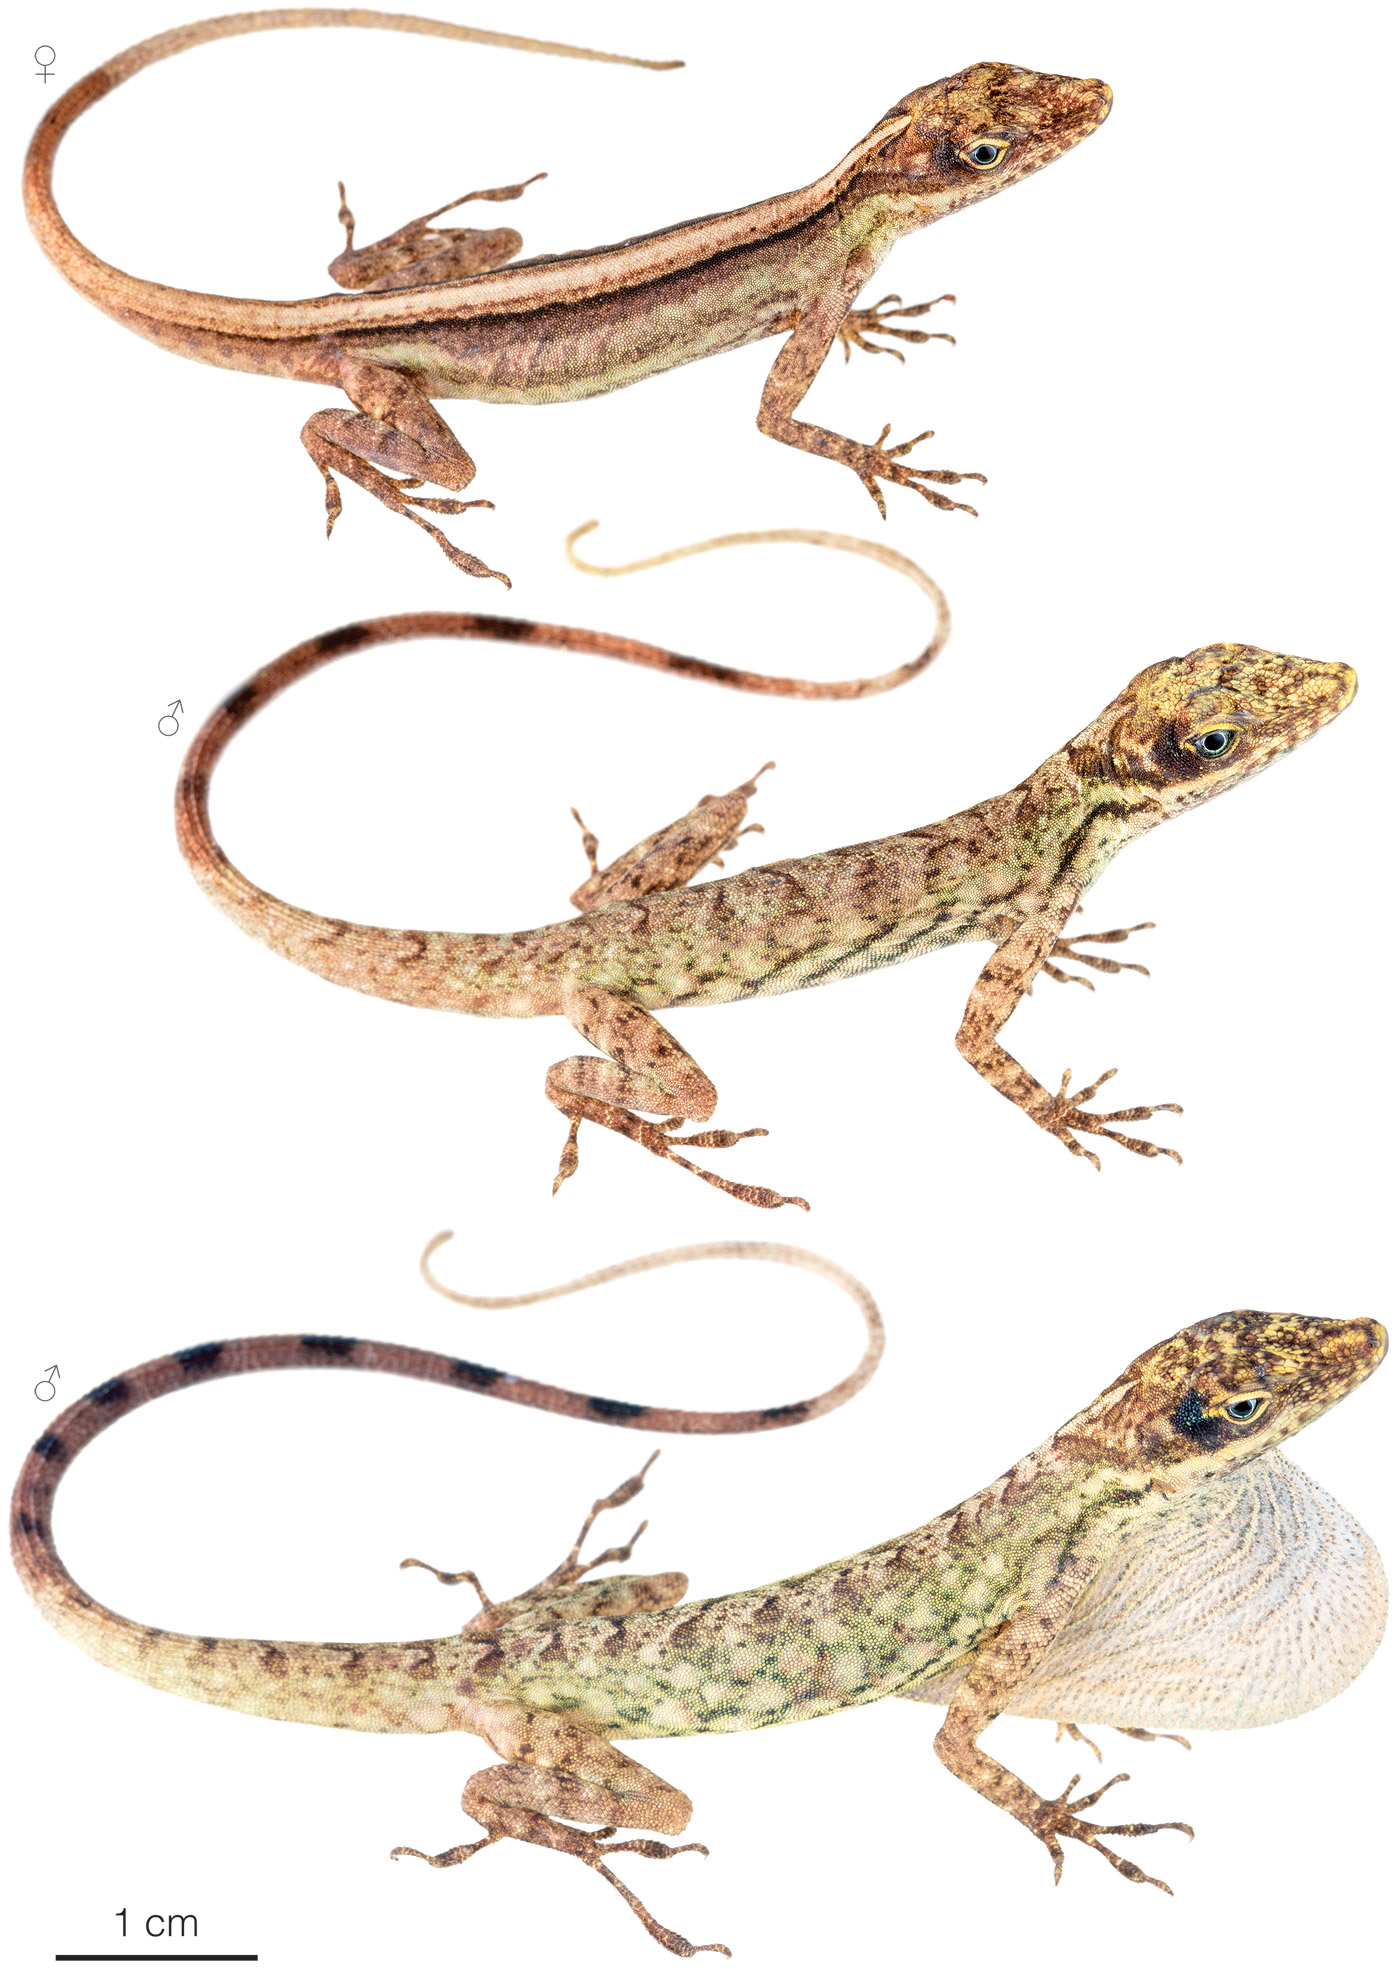 Figure showing variation among individuals of Anolis peraccae